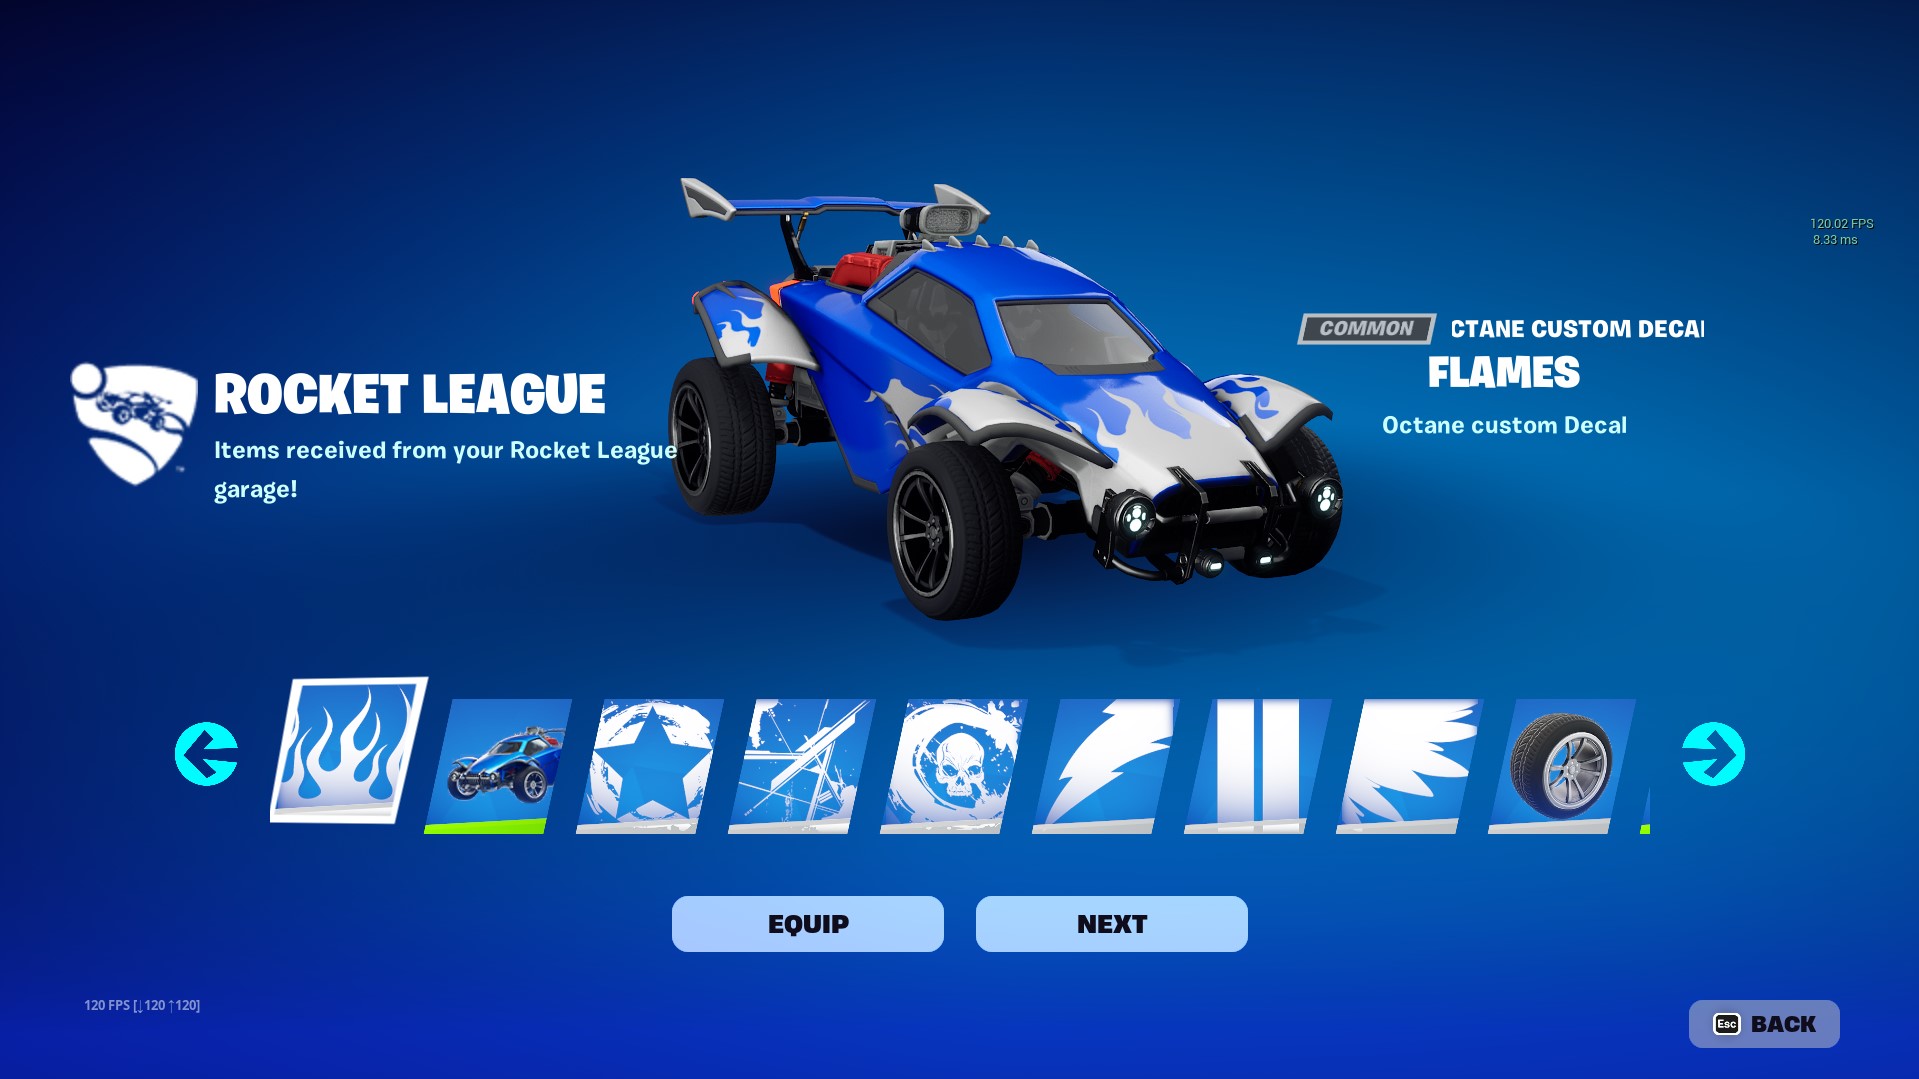 Rocket League Season 4 introduces new modes and more later this